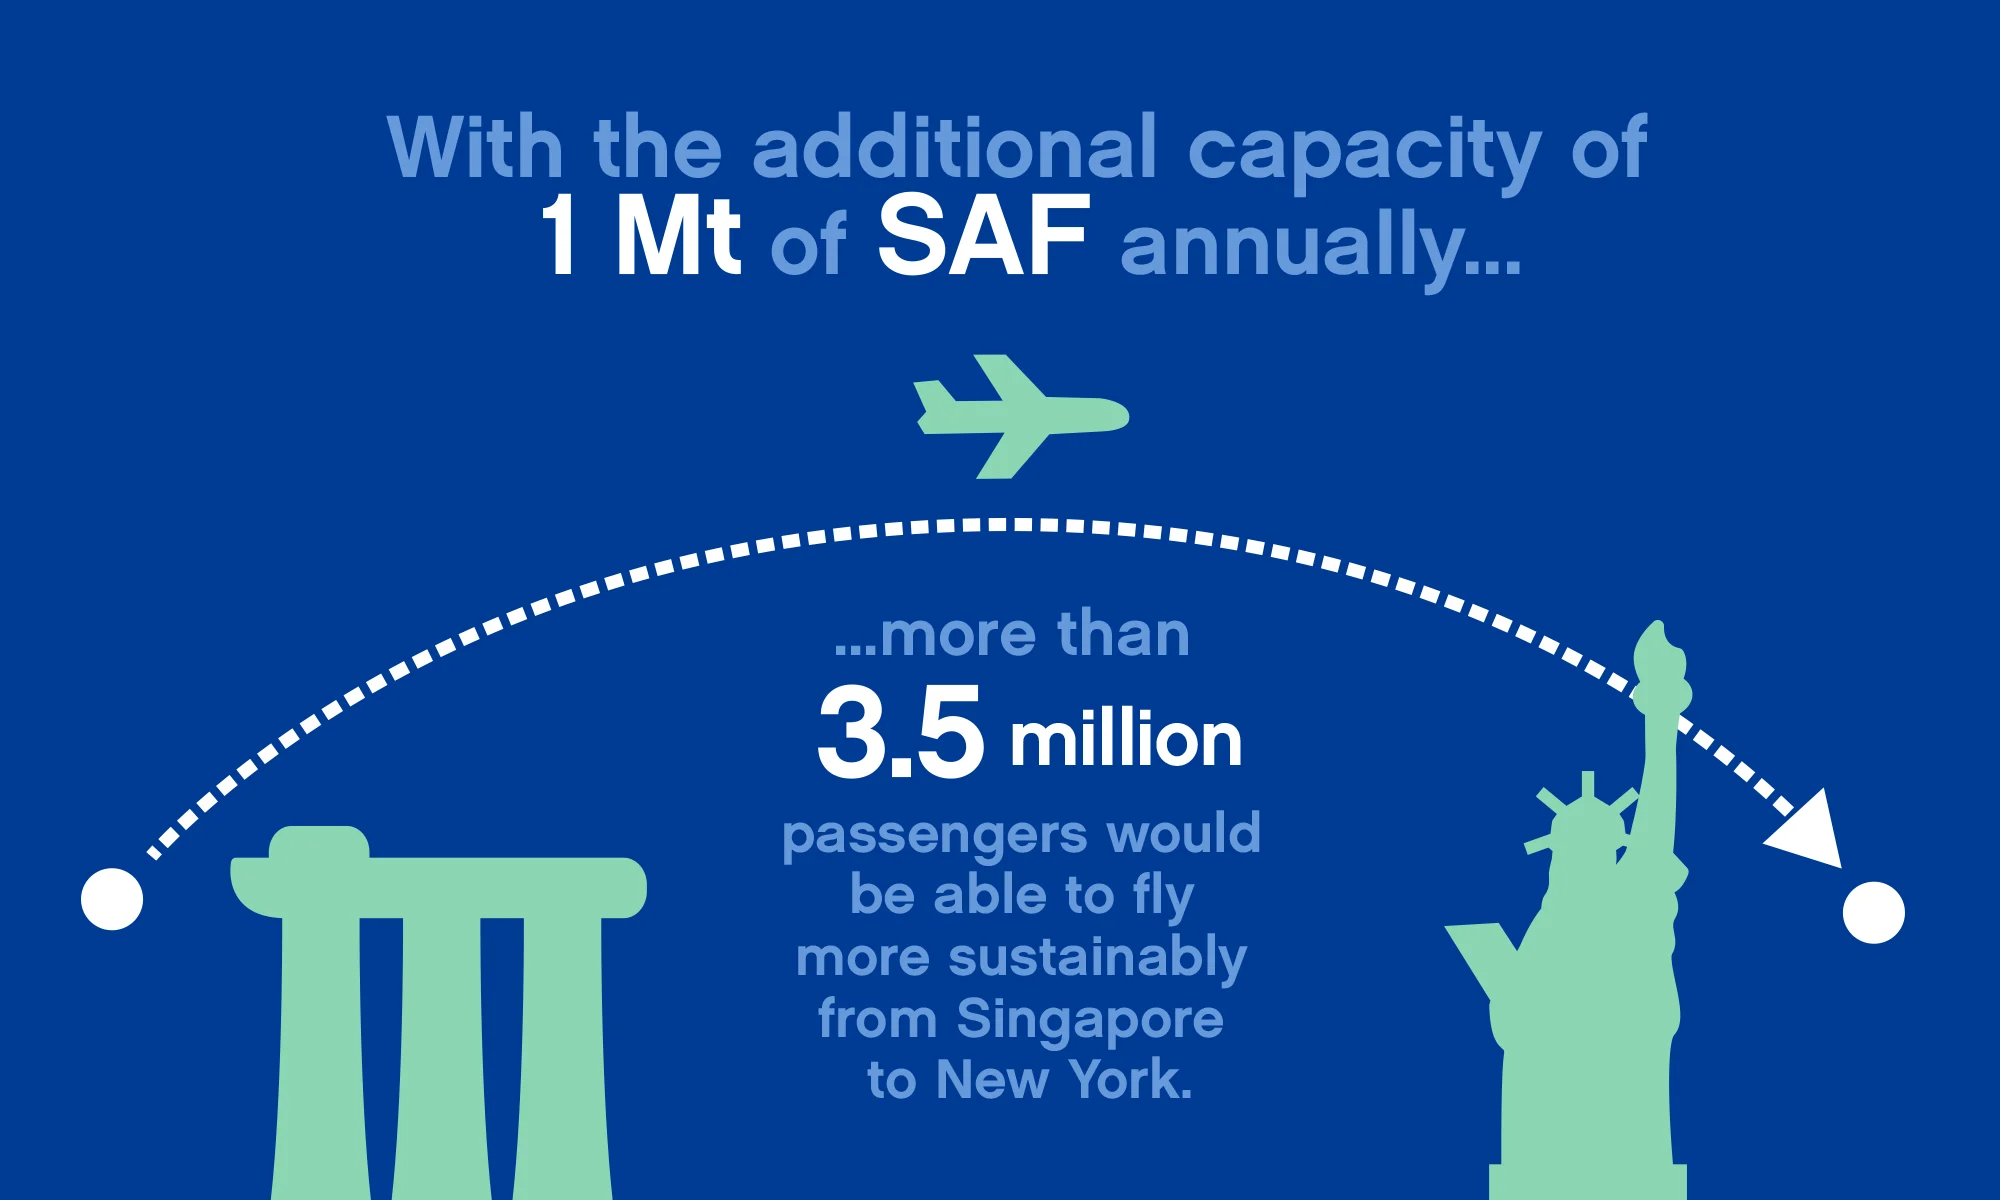 SAF additional annual capacity is 1 Mt